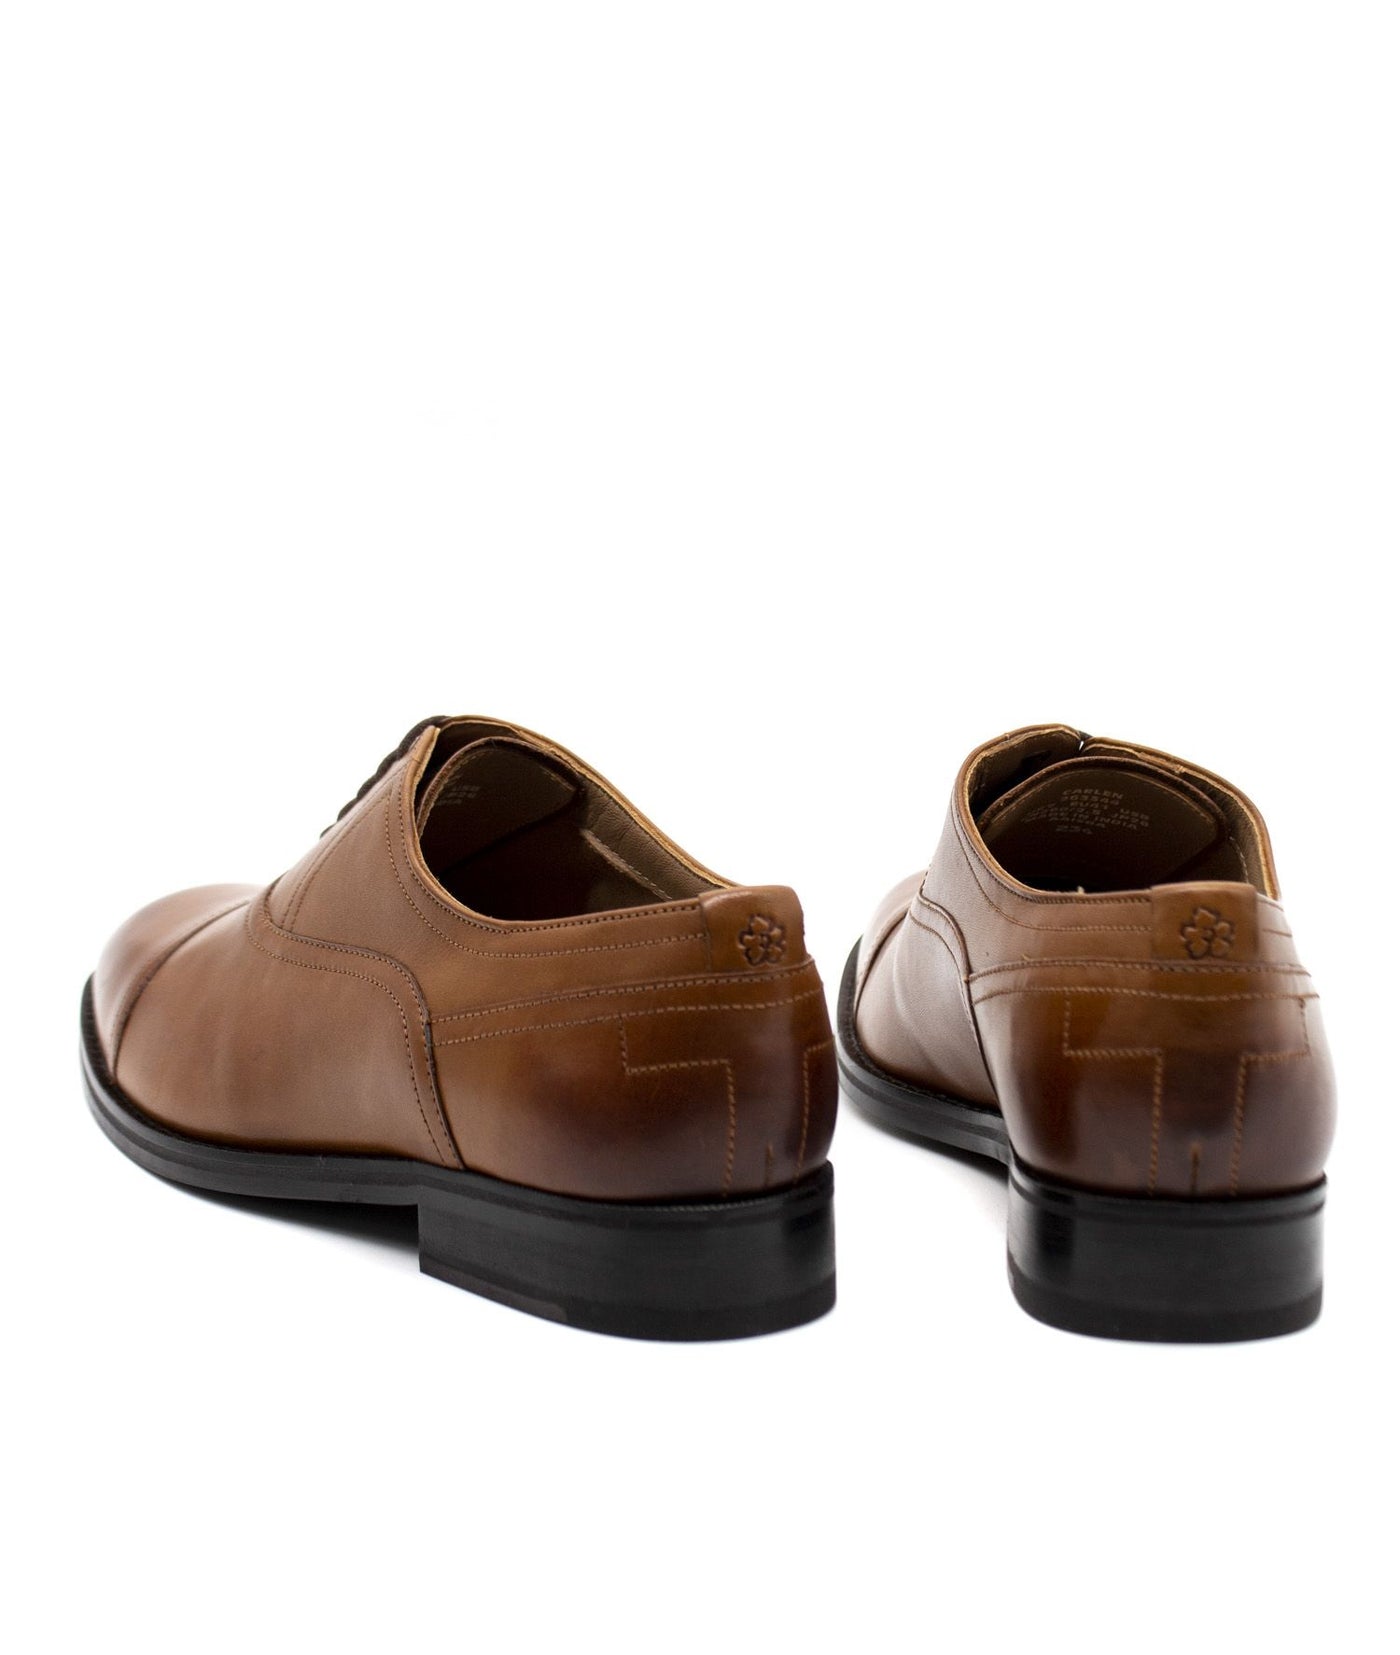 Ted Baker Carlen Formal Leather Oxford Shoes | Tan